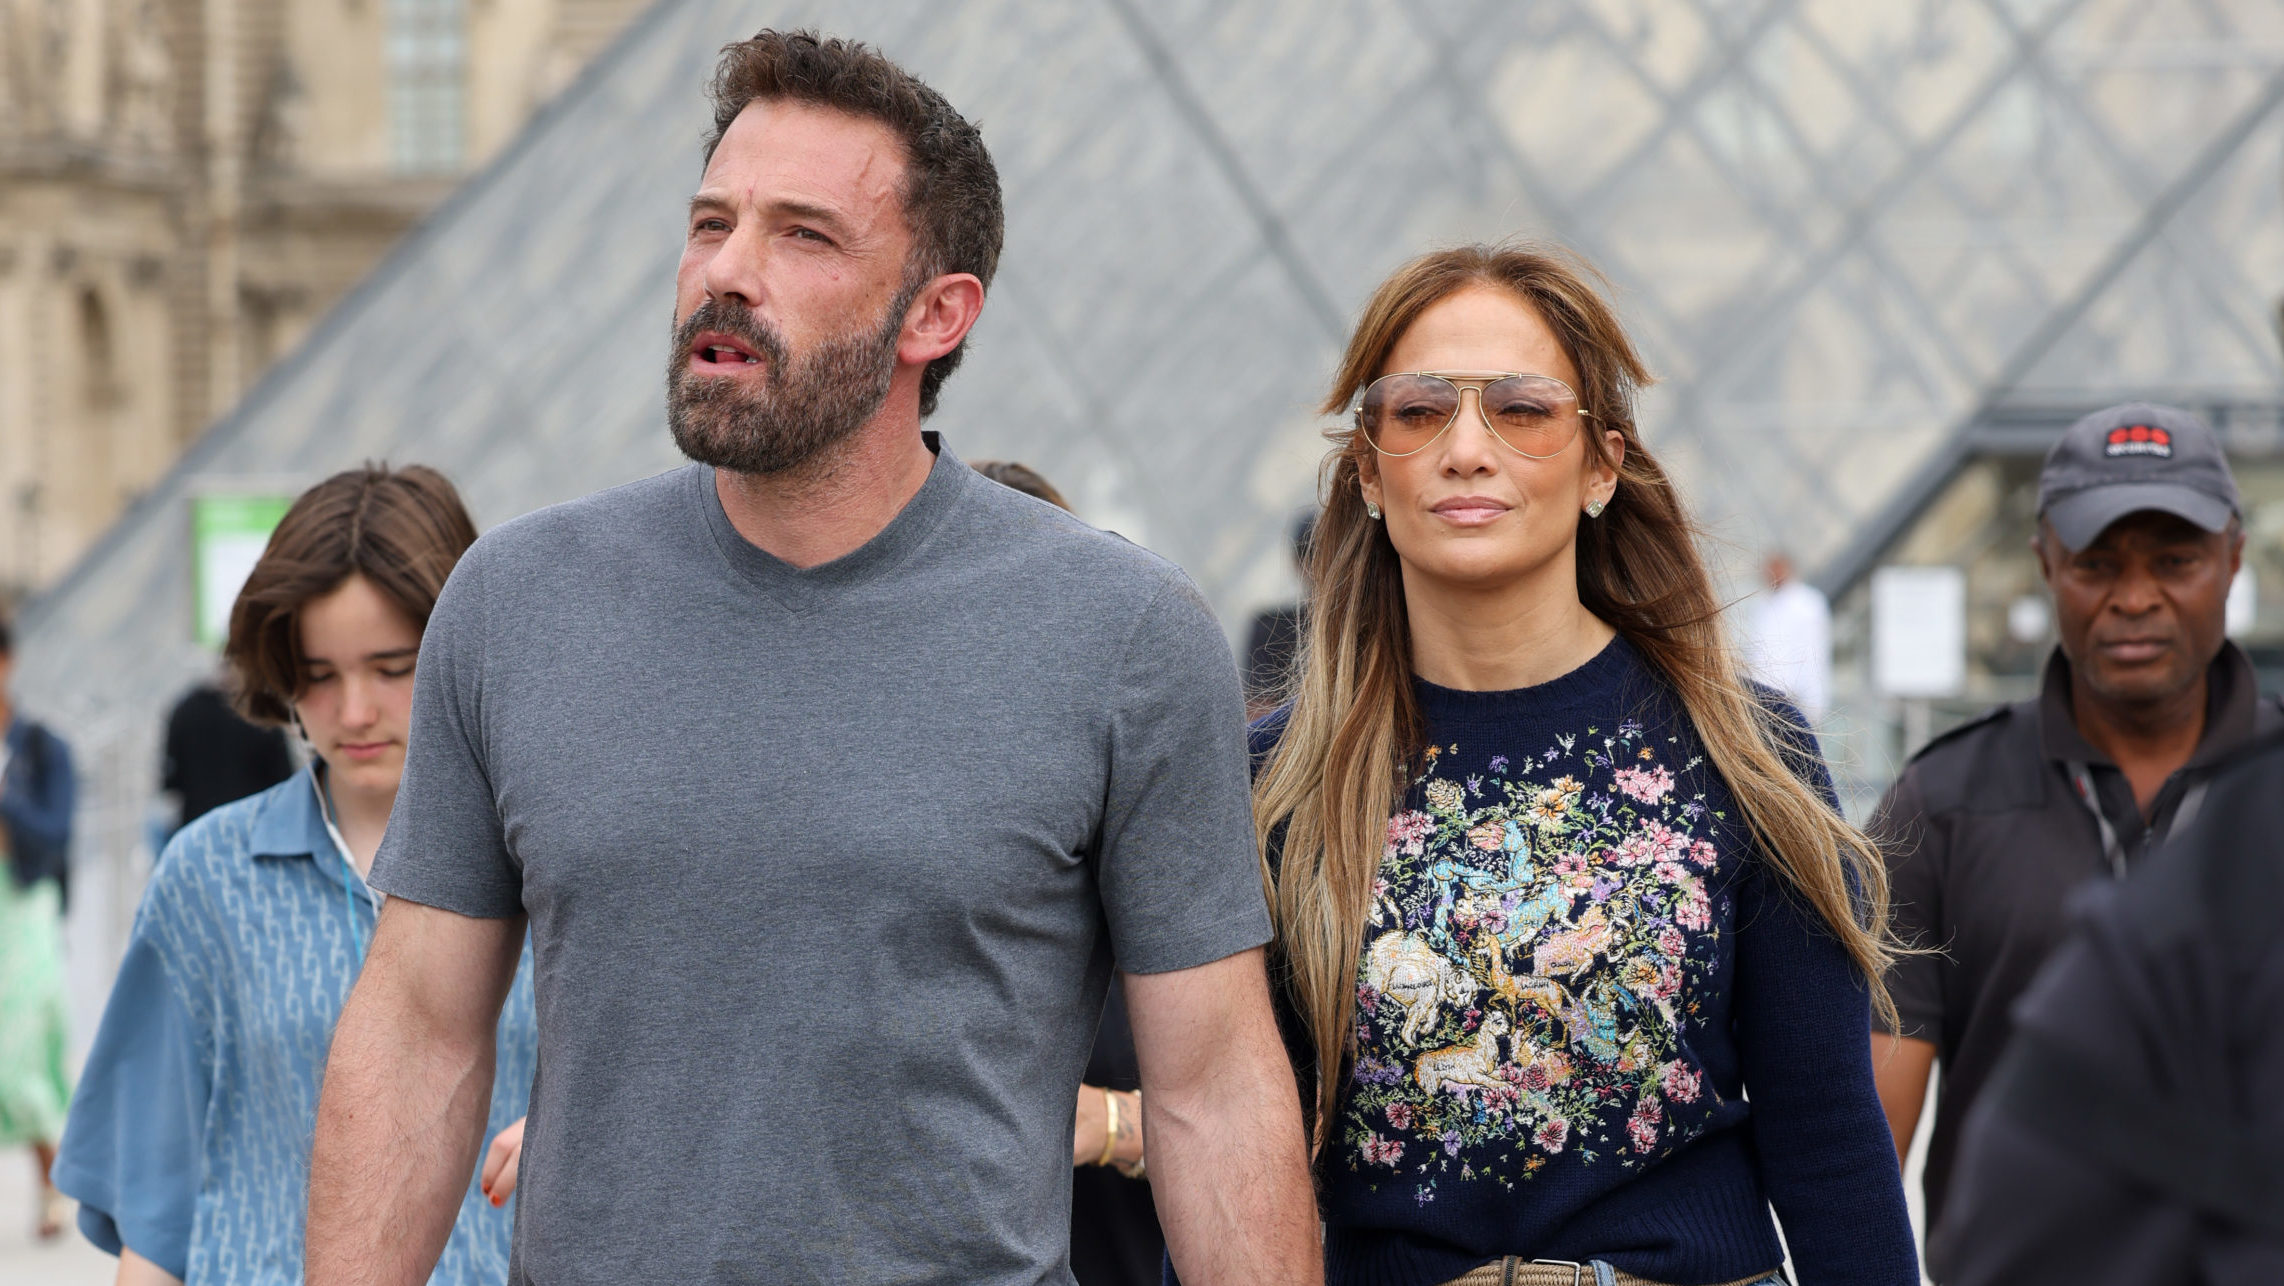 Split up?  Three weeks after their wedding, Jennifer Lopez and Ben Affleck decided to "leave".